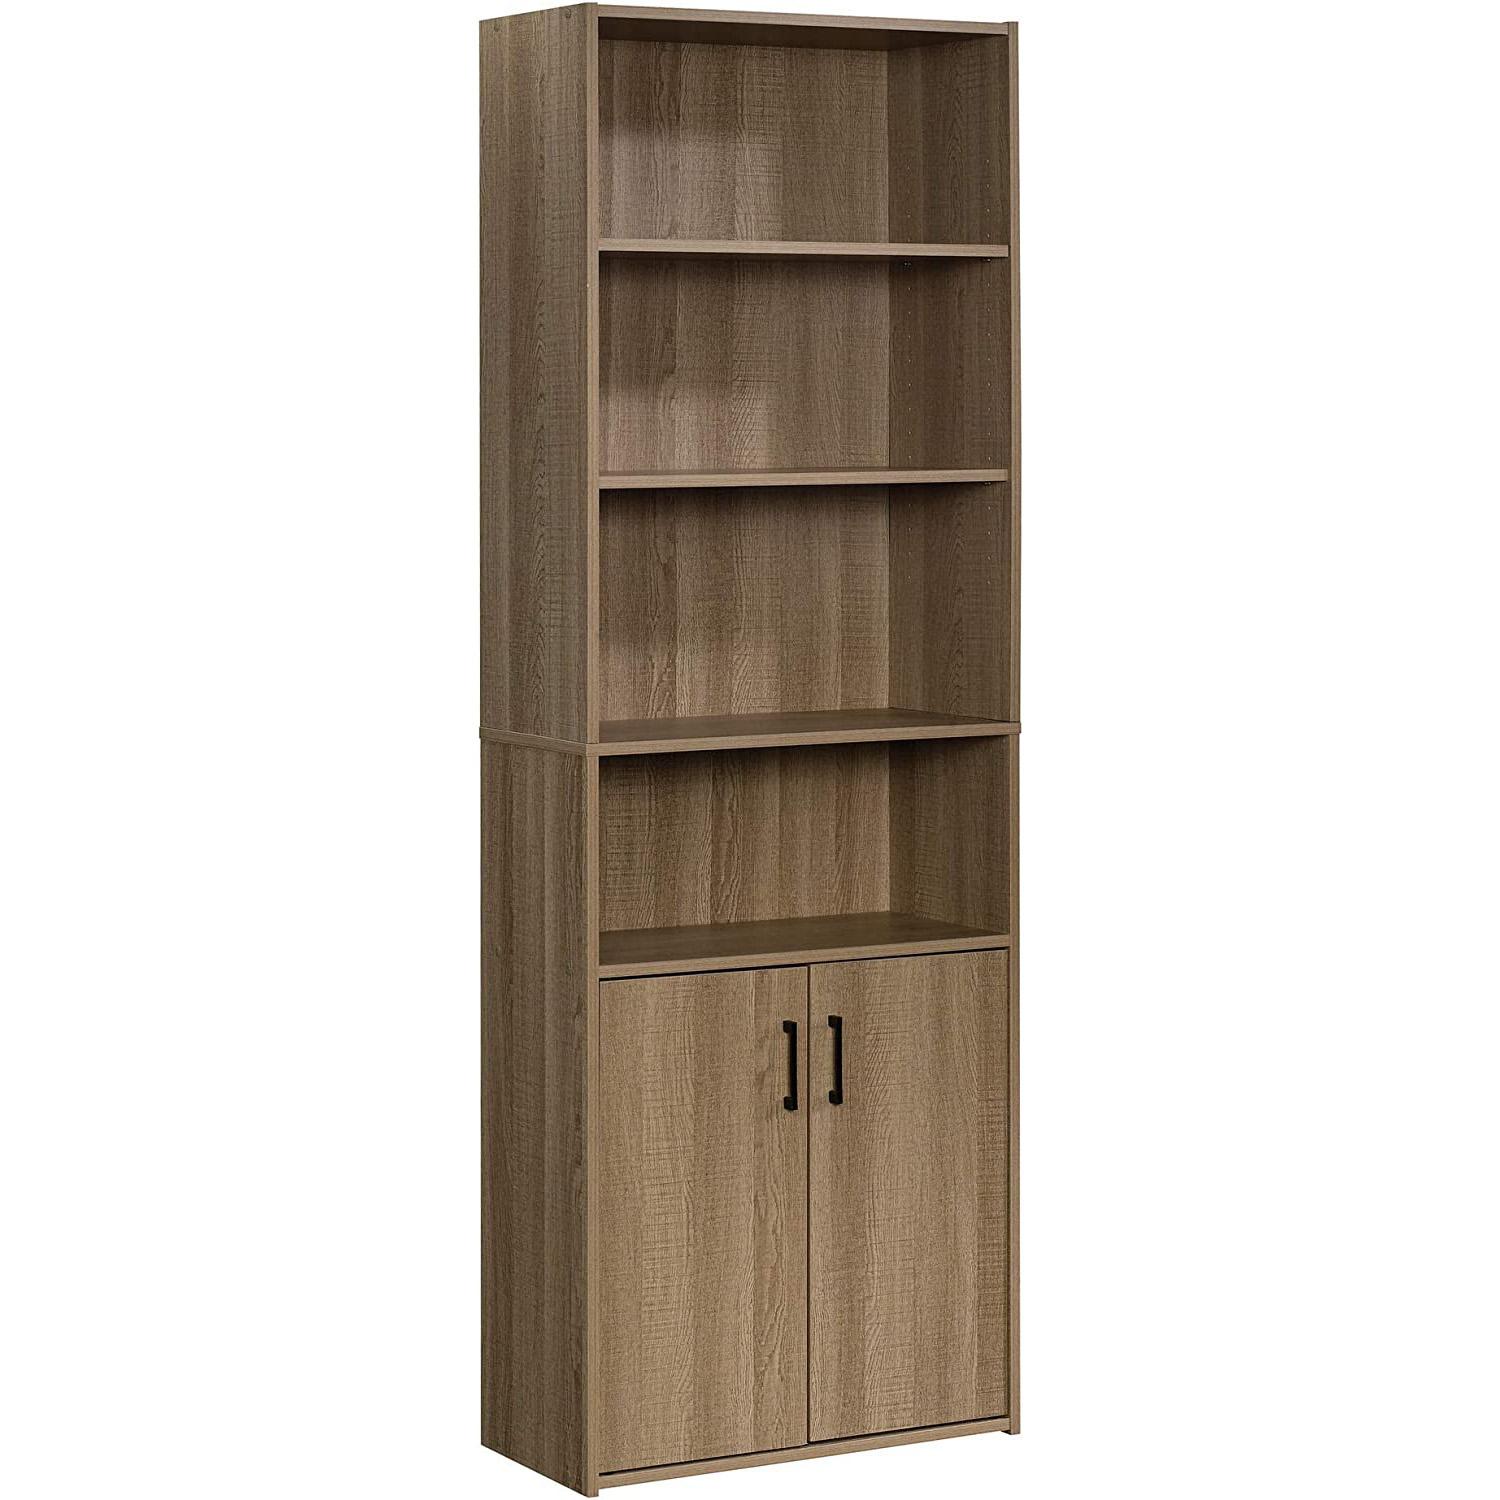 Sauder Beginnings Bookcase with Doors for $59.11 Shipped